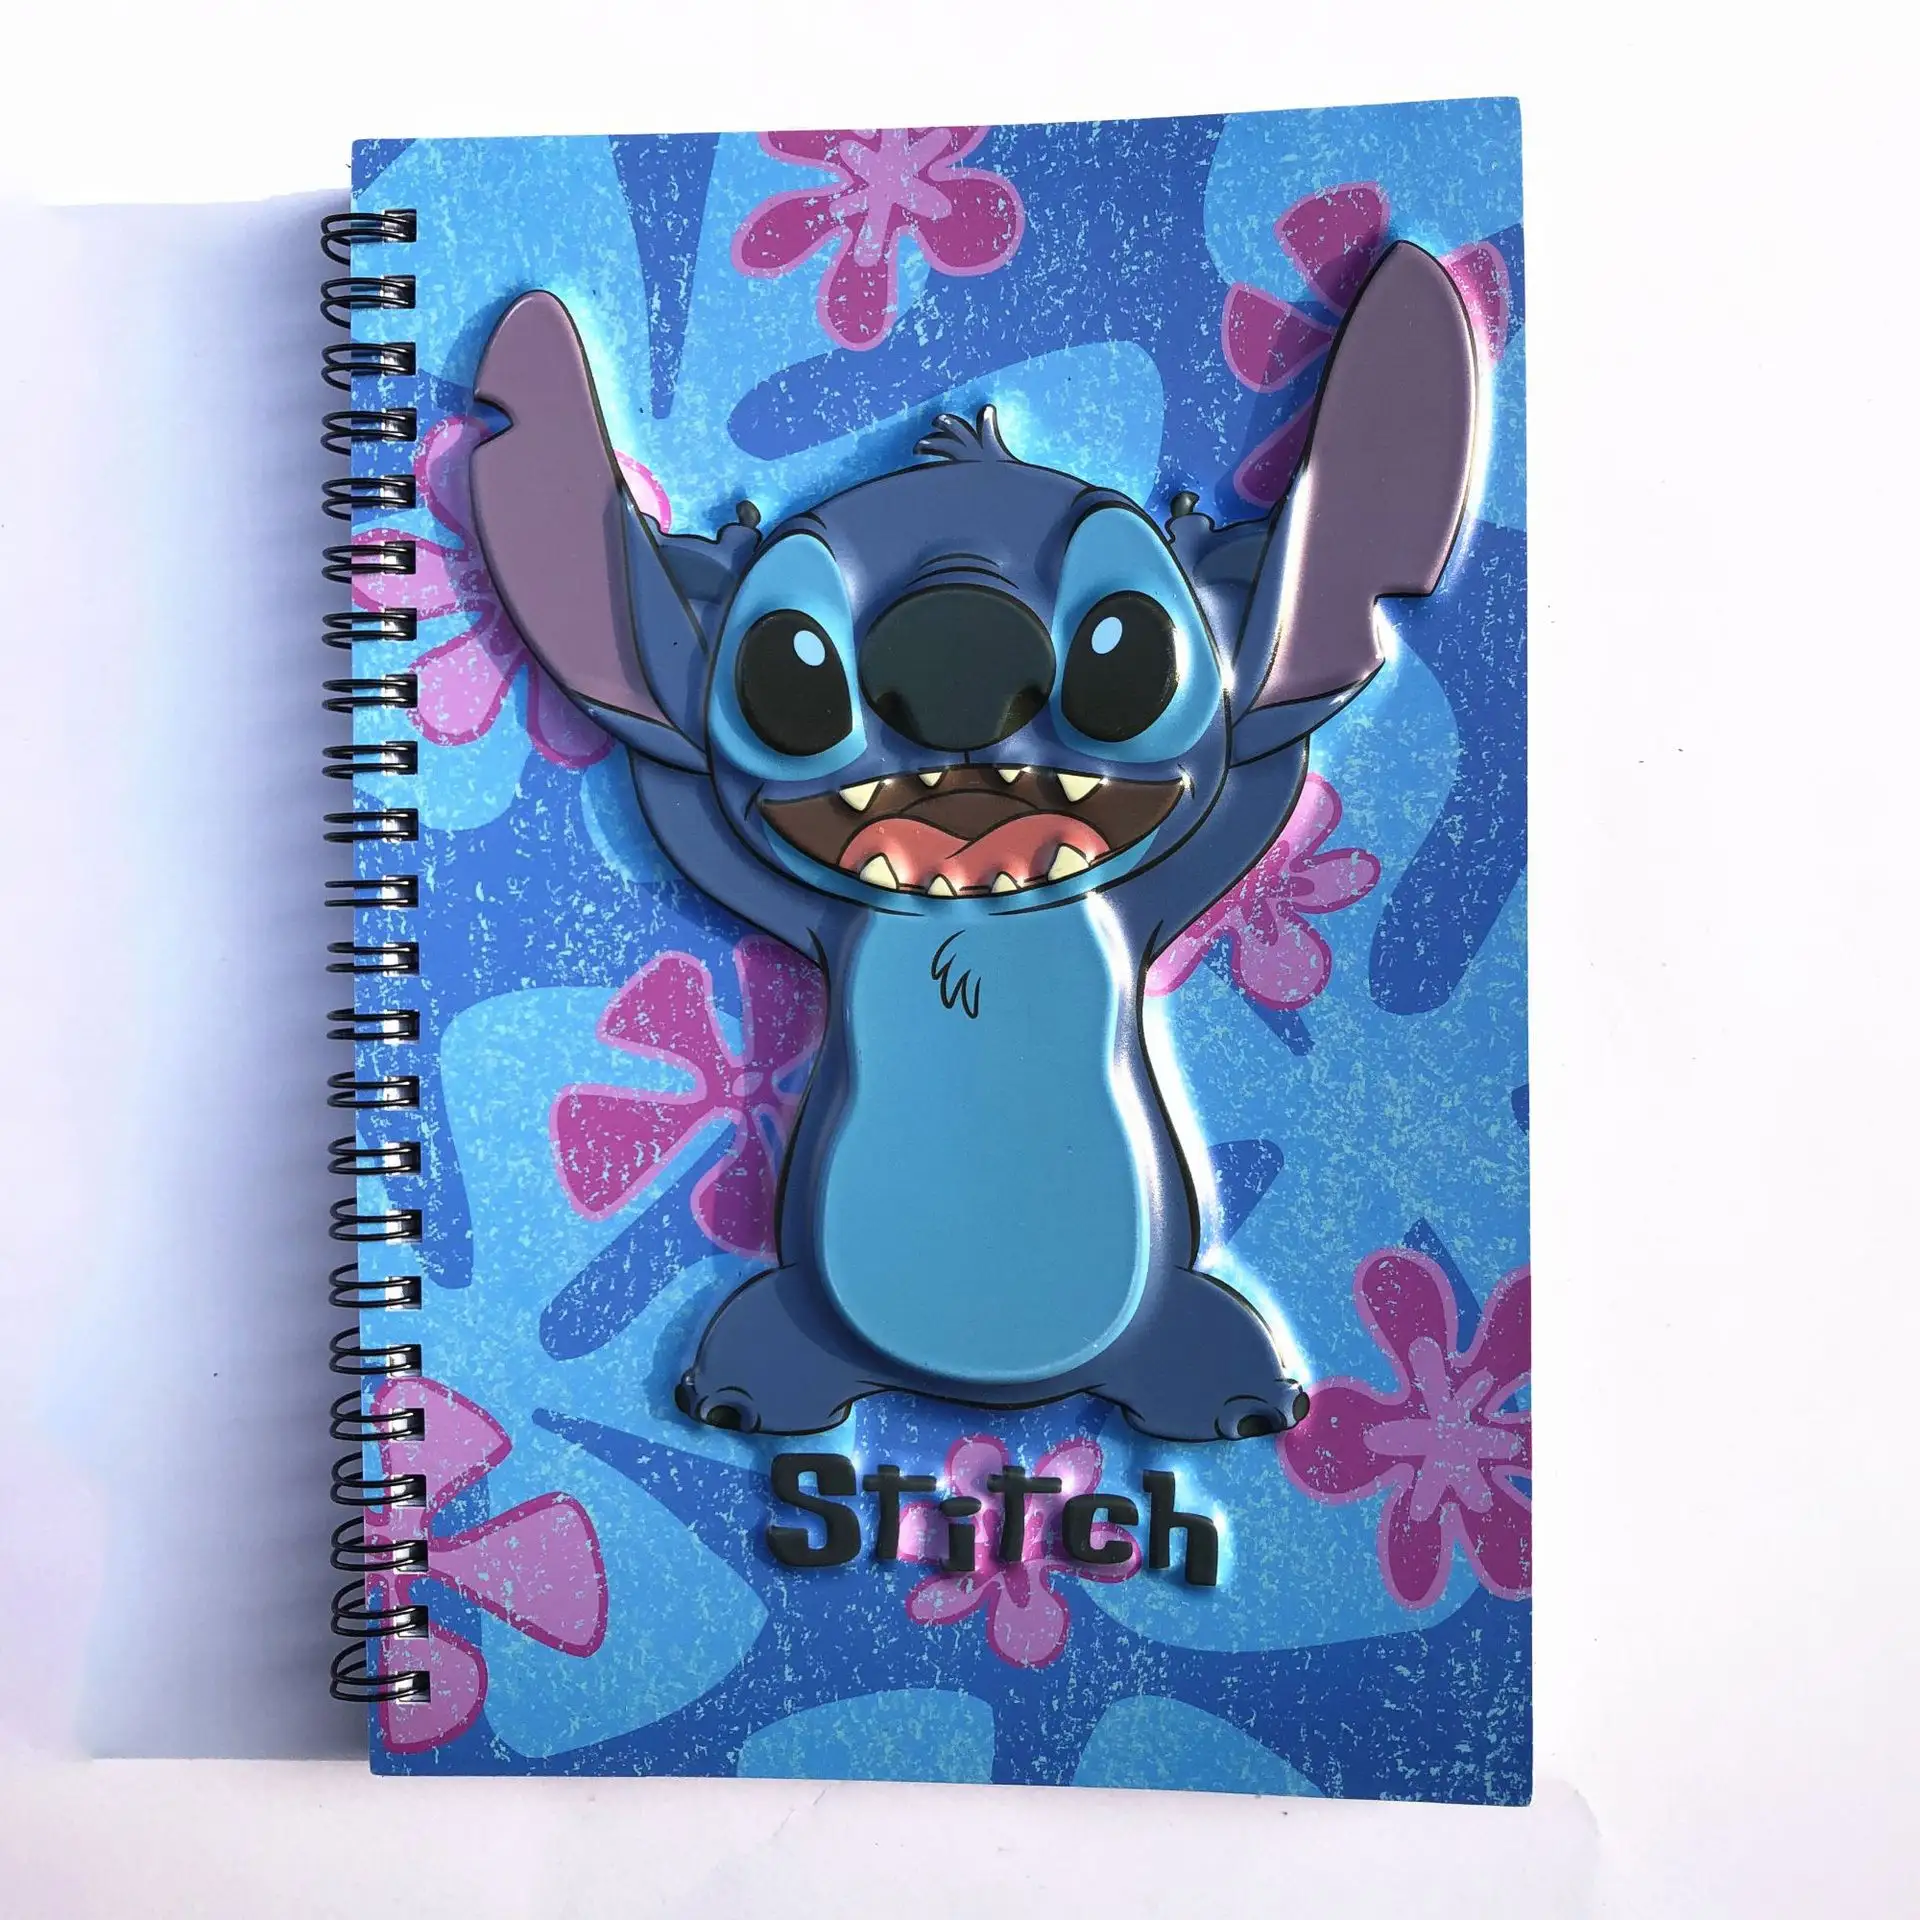 Stitch Notebook 3D Cover Office Stationery design Notebook diary